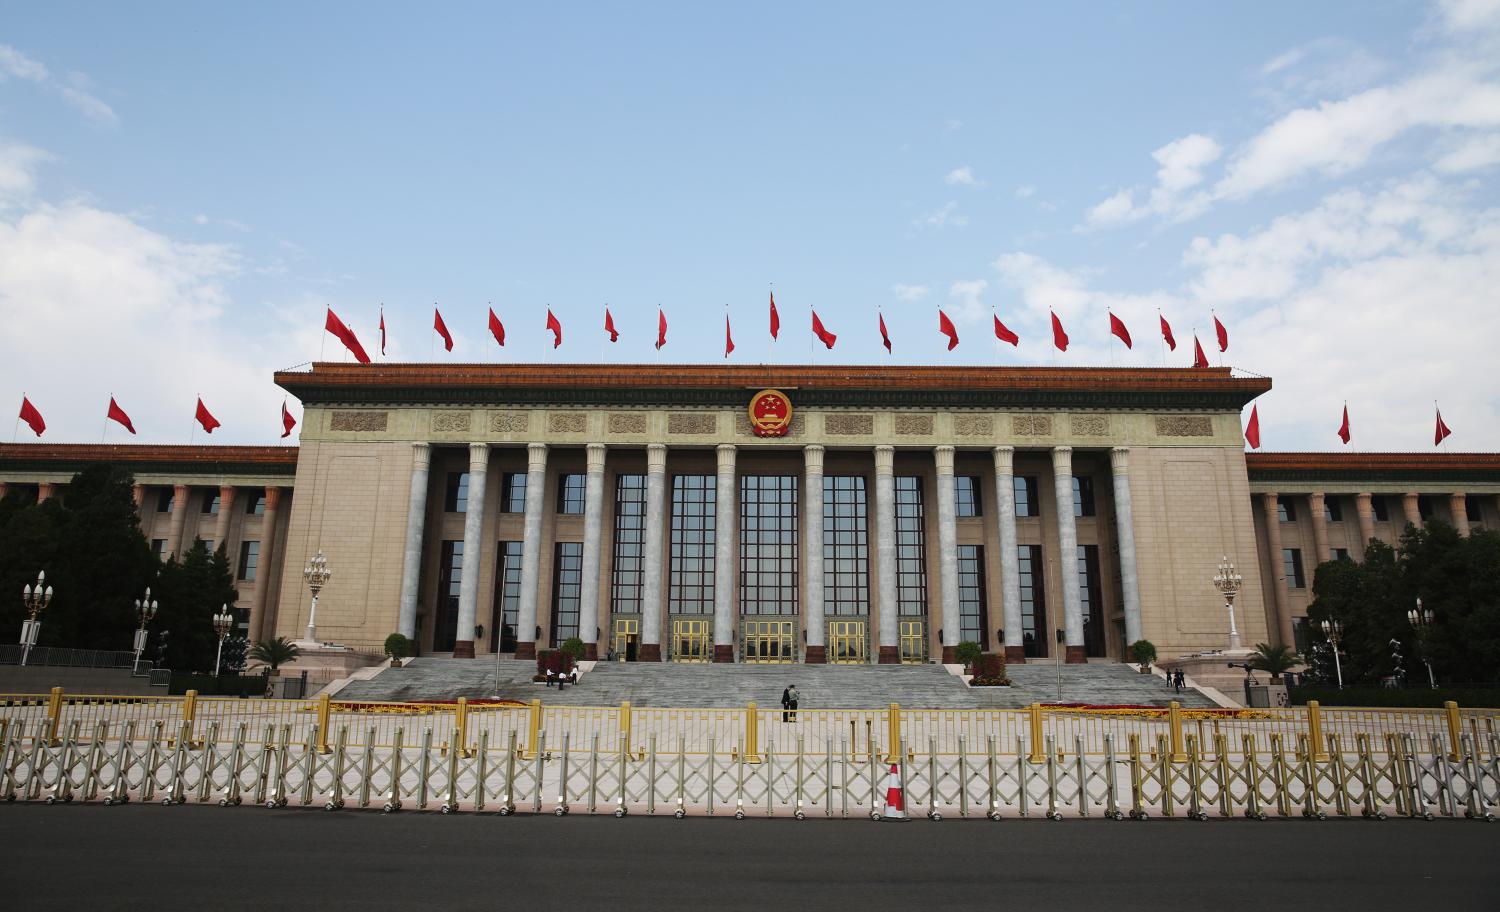 A photo shows the Great Hall of the People, the venue of The National People's Congress of the People's Republic of China (National People's Congress or NPC), in Beijing, China on May 28, 2020. At the final plenary session will be held on the afternoon on May 28th, a policy "national security legislation" will be plan to adopt to crack down on anti-governmental movements in Hong Kong, but among the Hong Kong citizens, there is growing concern that it will lead to the collapse of the "one country, two systems". The congress was supposed to start on March 5th, however it was postponed due to the new coronavirus COVID-19 spread in the country.  ( The Yomiuri Shimbun )